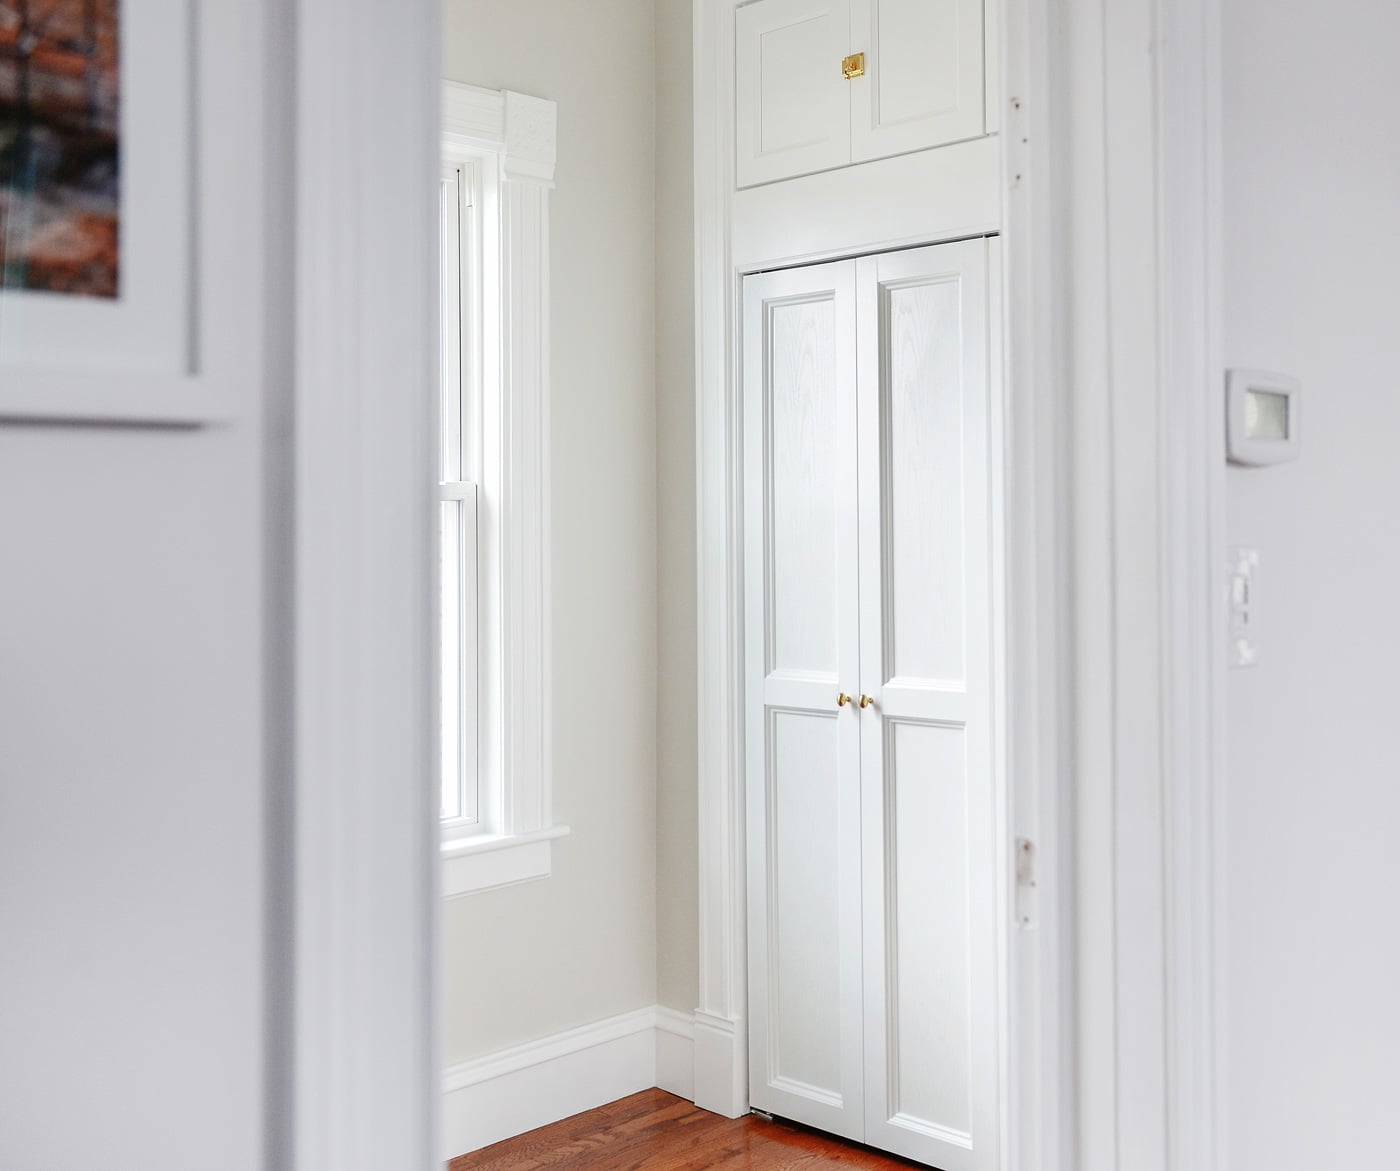 A view of our custom bi-fold doors, looking into Lucy's future nursery | via Yellow Brick Home